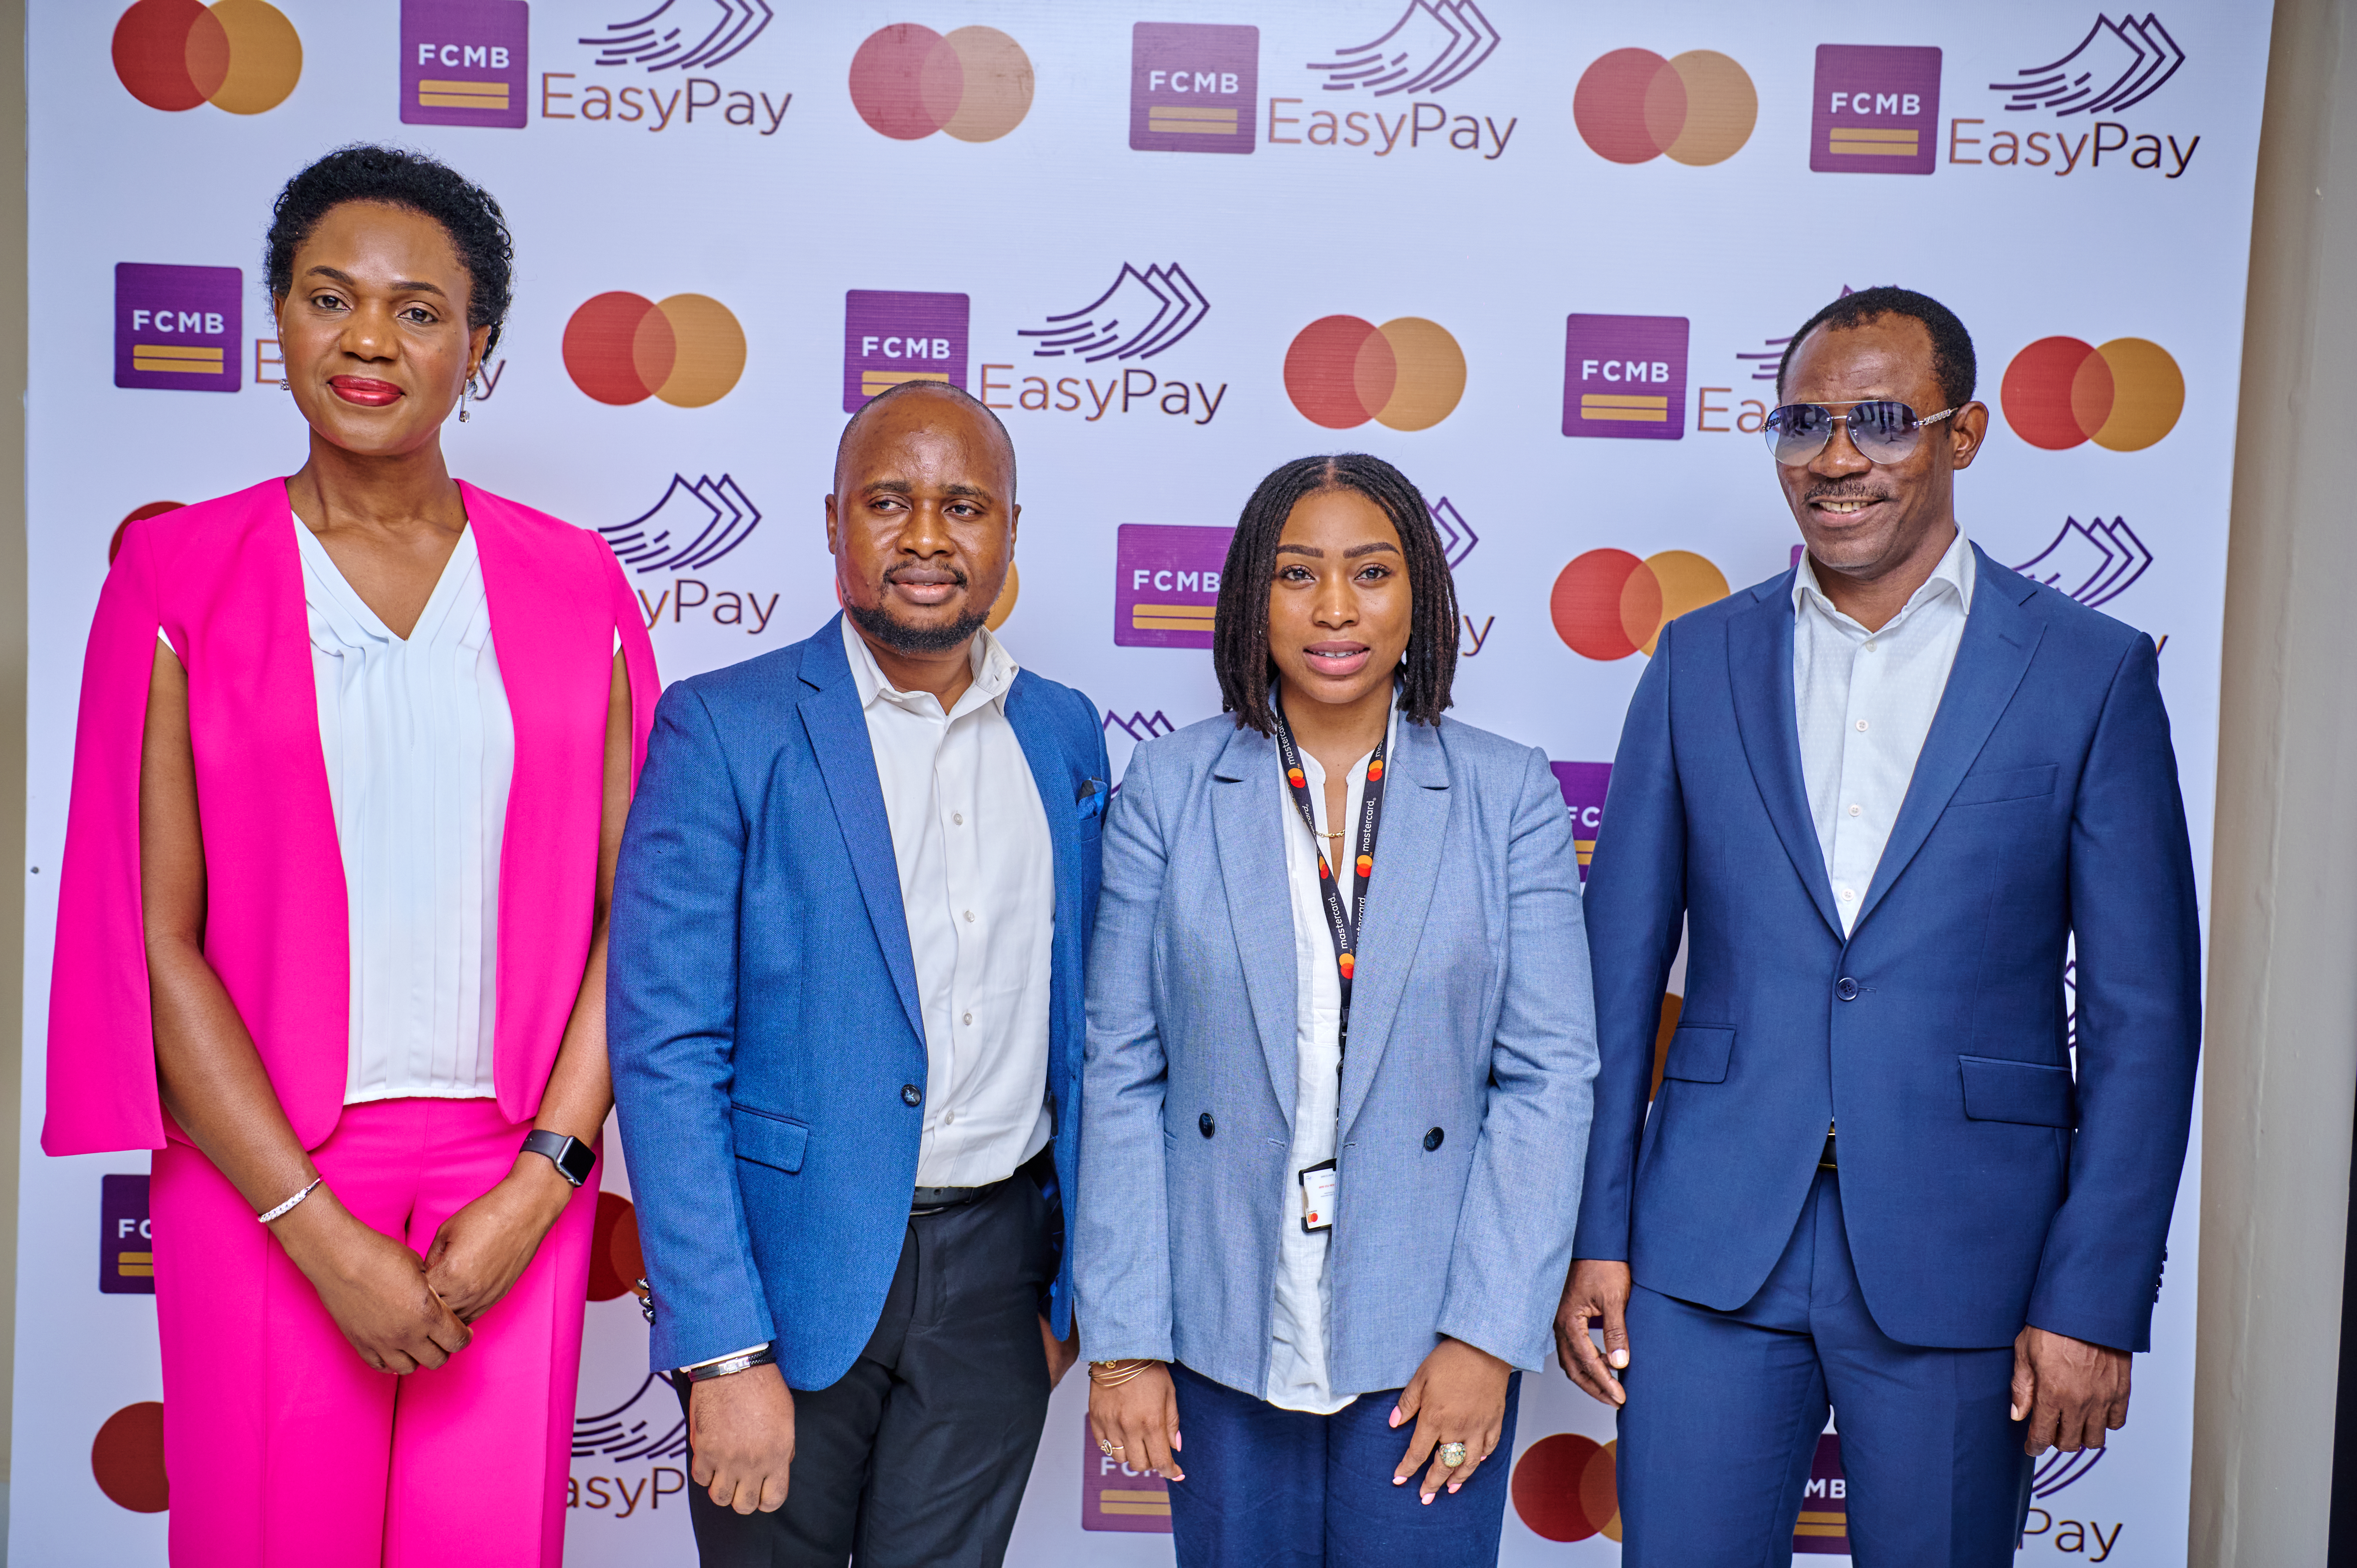 L-R: Country Manager & Area Business Head, West Africa, Mastercard, Ebehijie Momoh; Head of Partnership and Channels Development, Netplus, Samuel Onwuekwe, Vice President, Customer Solutions, East & West Africa, Mastercard, Kari Tukur & Divisional Head, Payment & Solution, First City Monument Bank (FCMB), Frank Atat, at the FCMB EasyPay launch, powered by Mastercard, on Tuesday, May 16 2023 in Lagos.